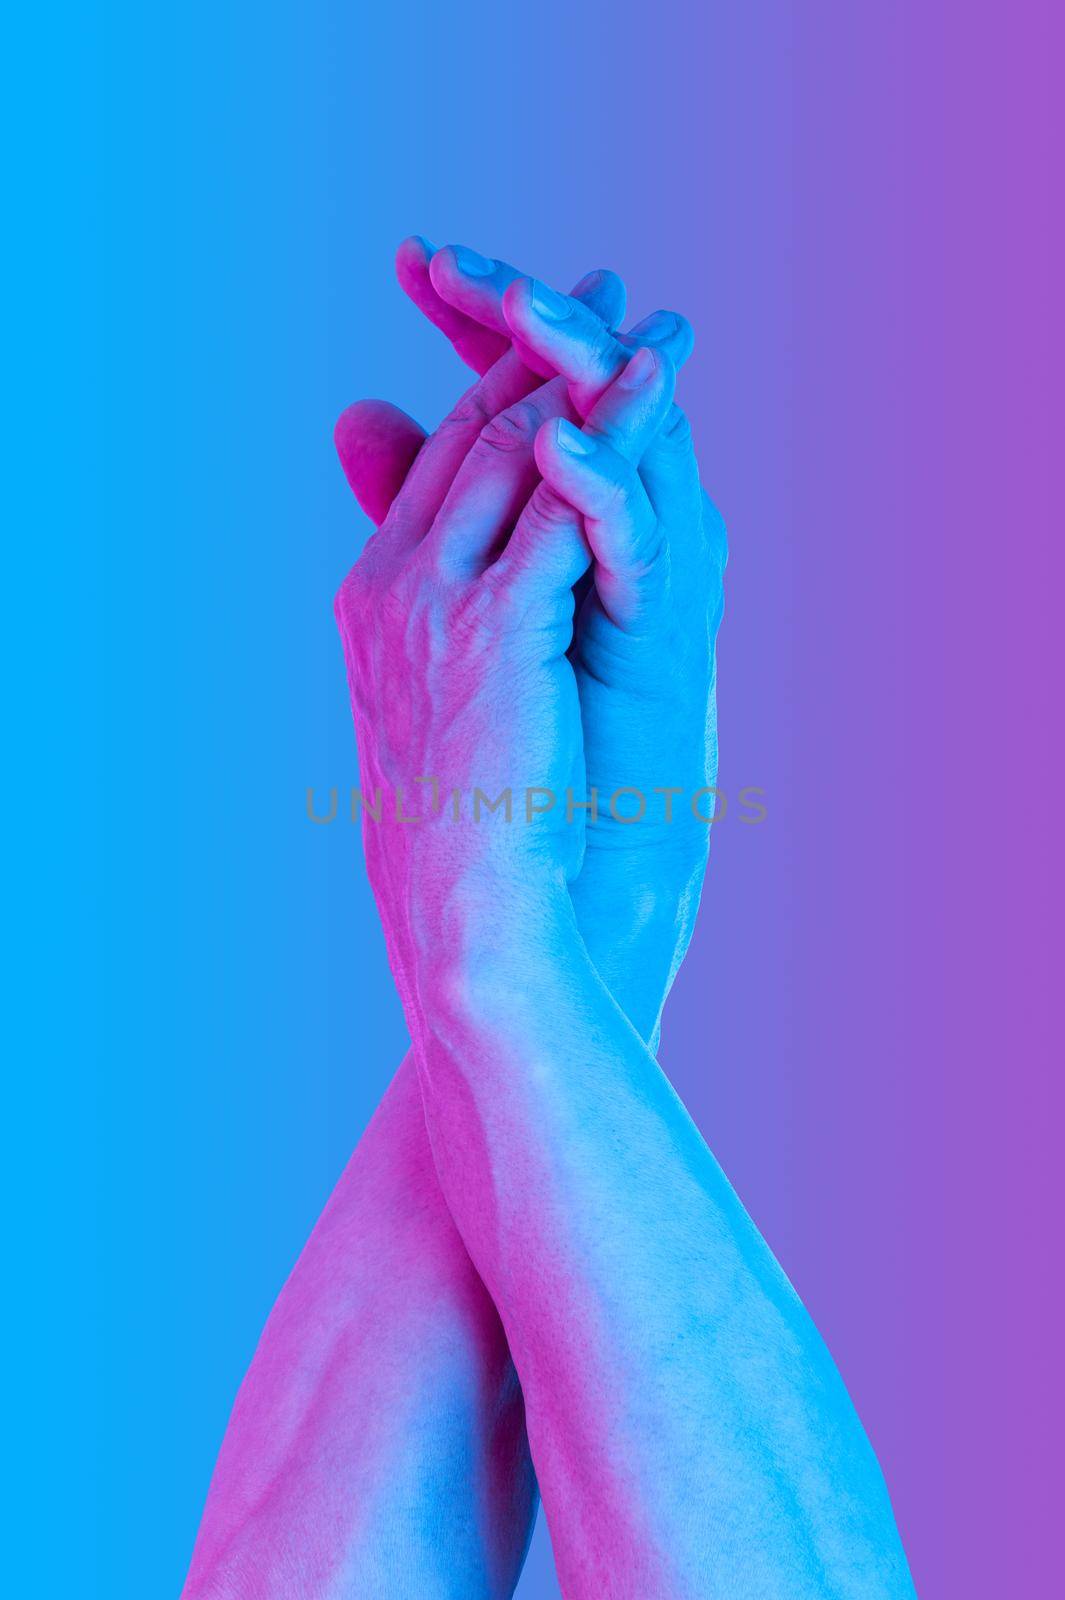 Hands in a surreal style in violet blue neon colors. Modern psychedelic creative element with human palm for posters, banners, wallpaper. Copy space for text. Pop art culture. Magazine style template.